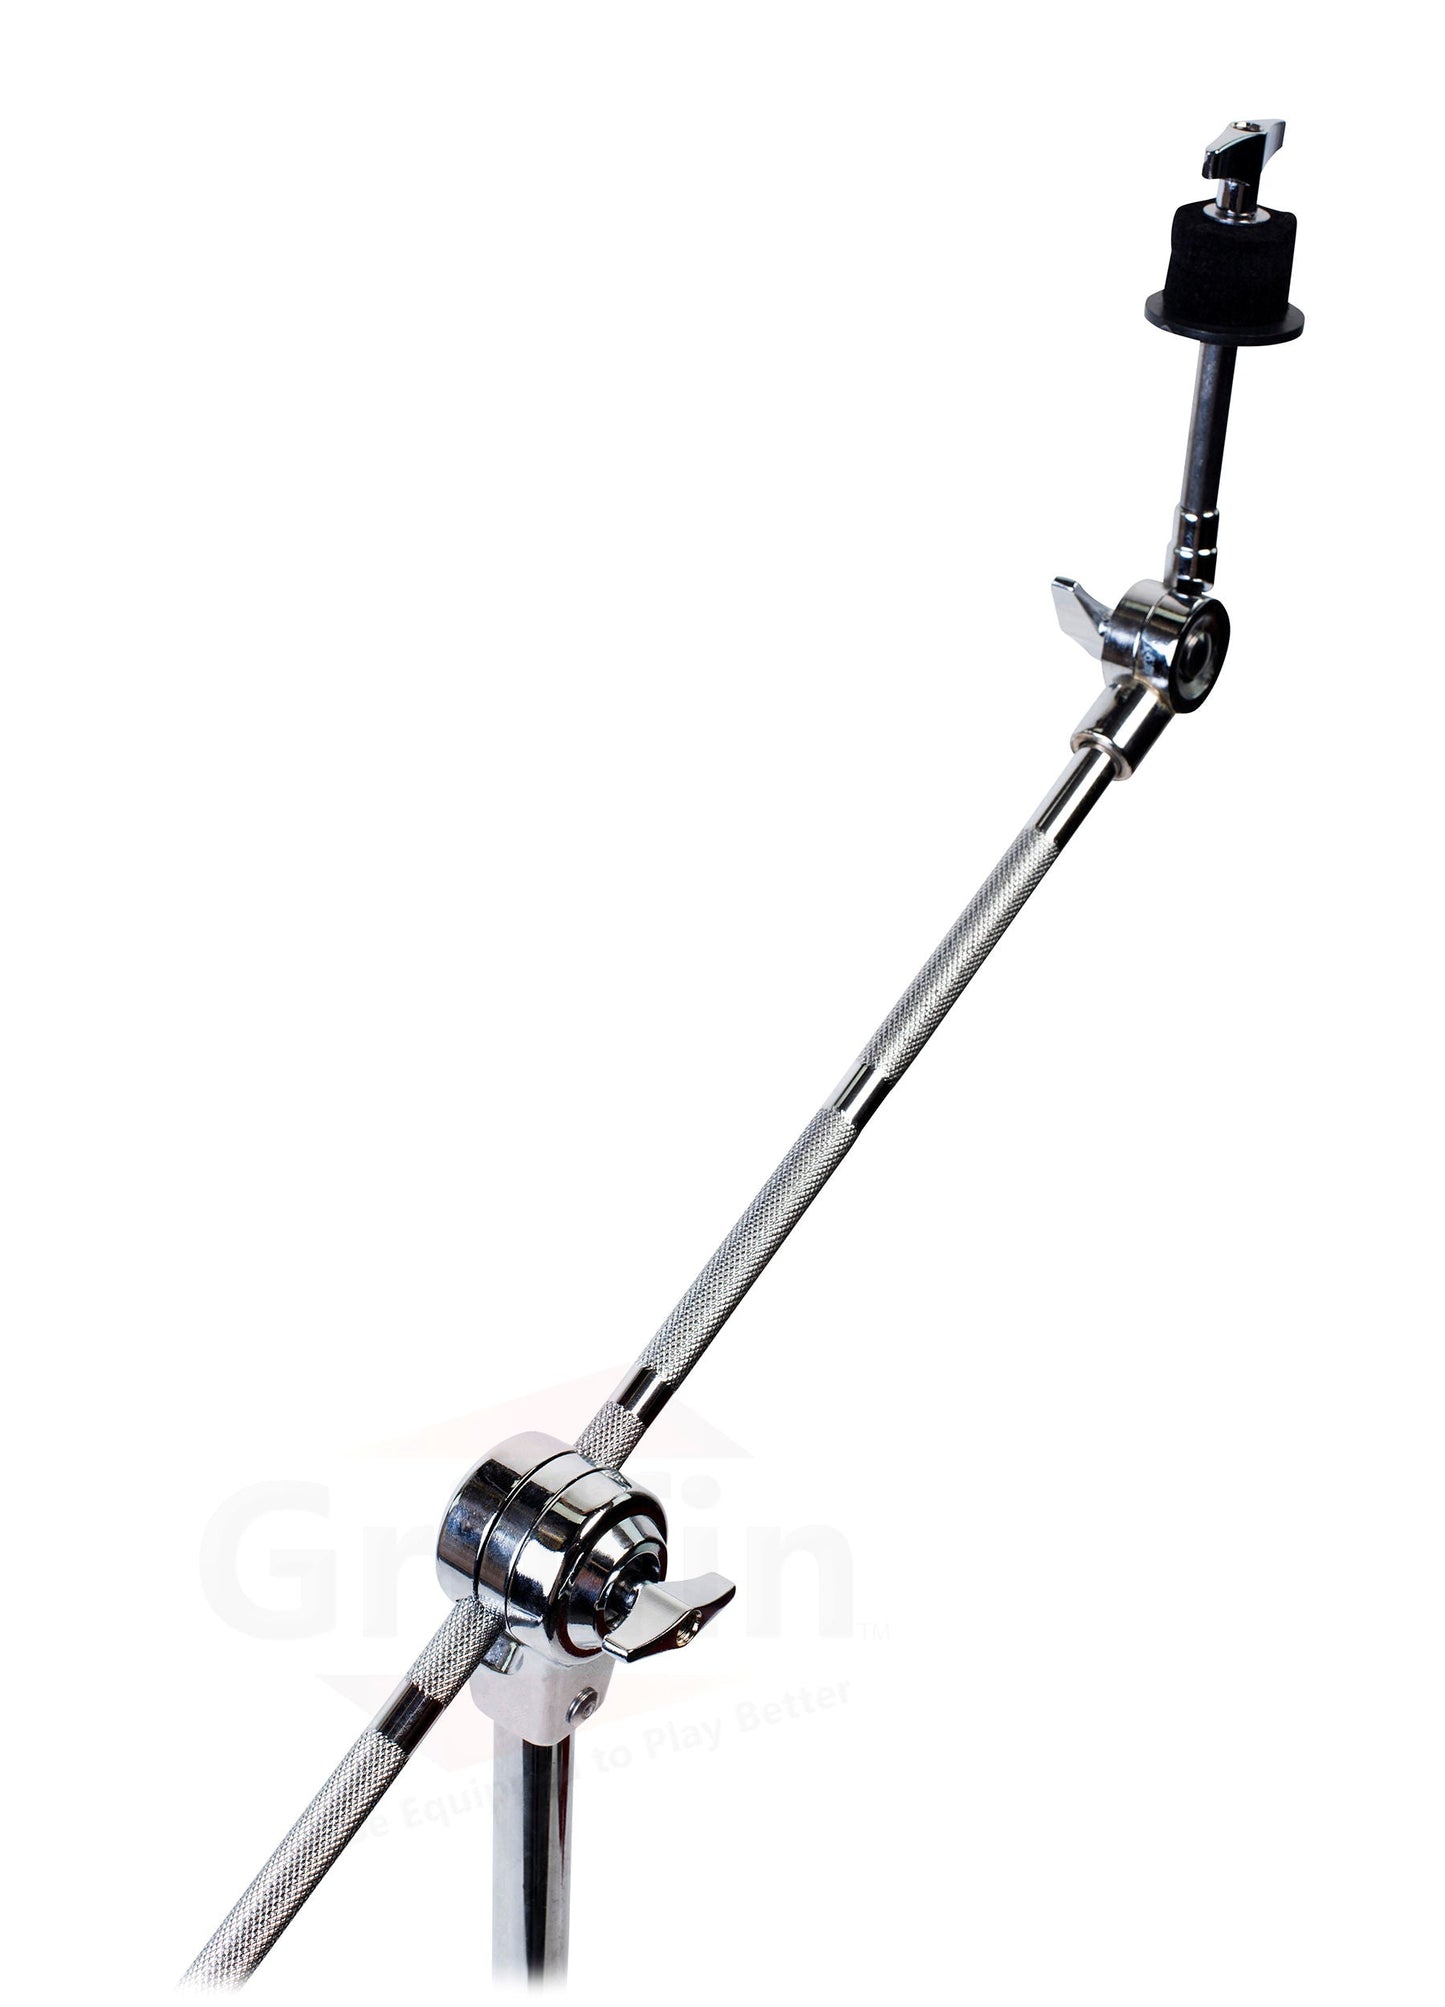 GRIFFIN Cymbal Boom Stand - Double Braced Drum Percussion Gear Hardware Set - Adjustable Height